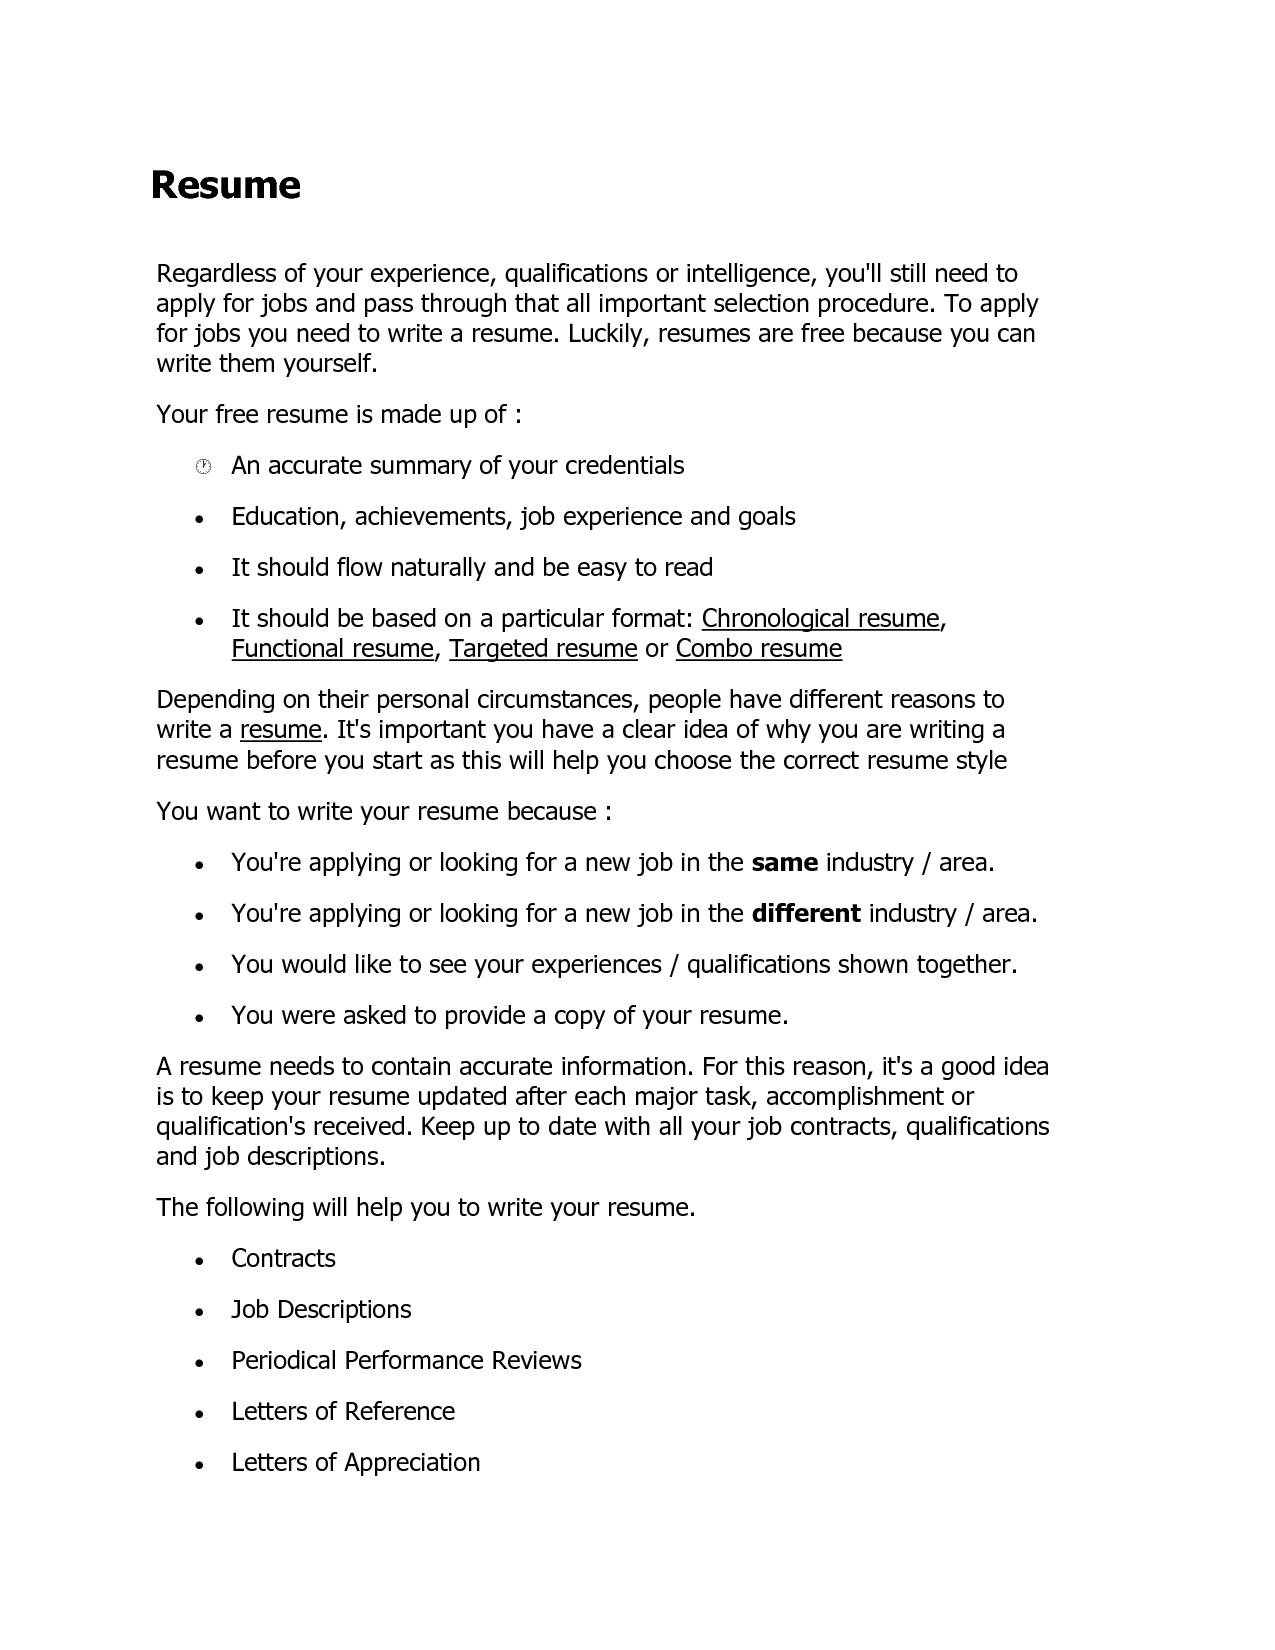 How To Do A Resume Zheen3qwwi how to do a resume|wikiresume.com